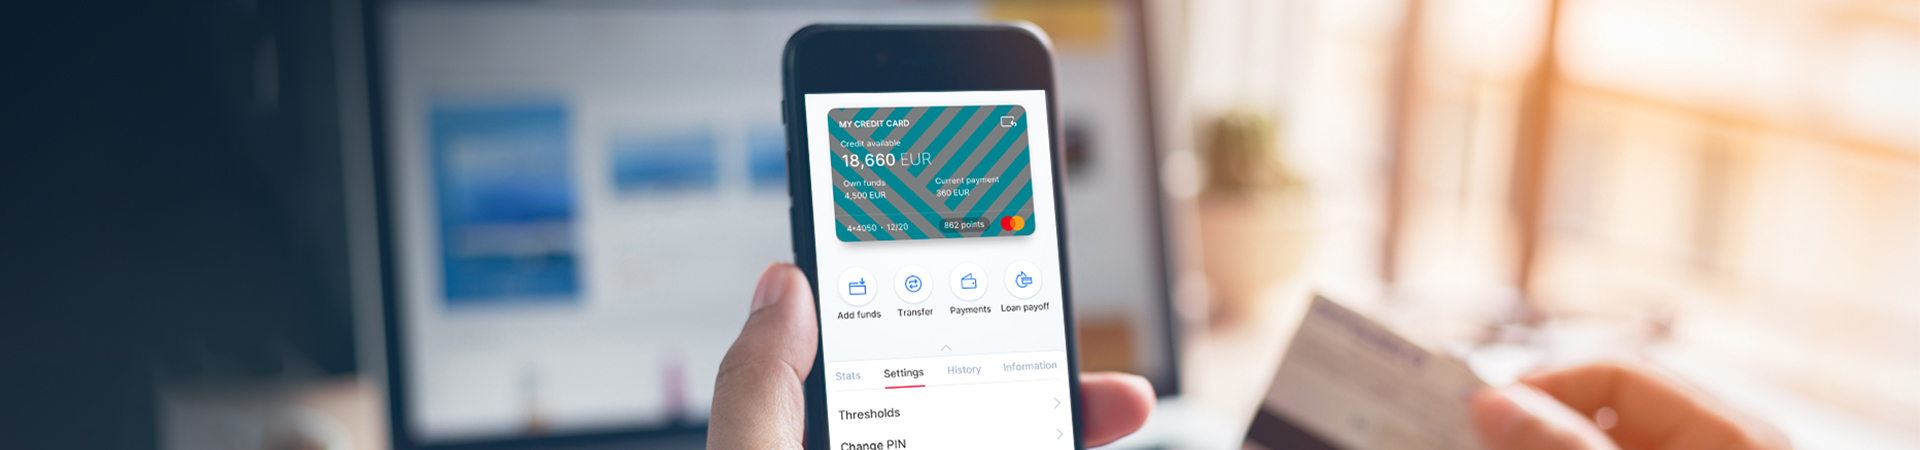 UX and UI Redesign for a Mobile Banking App